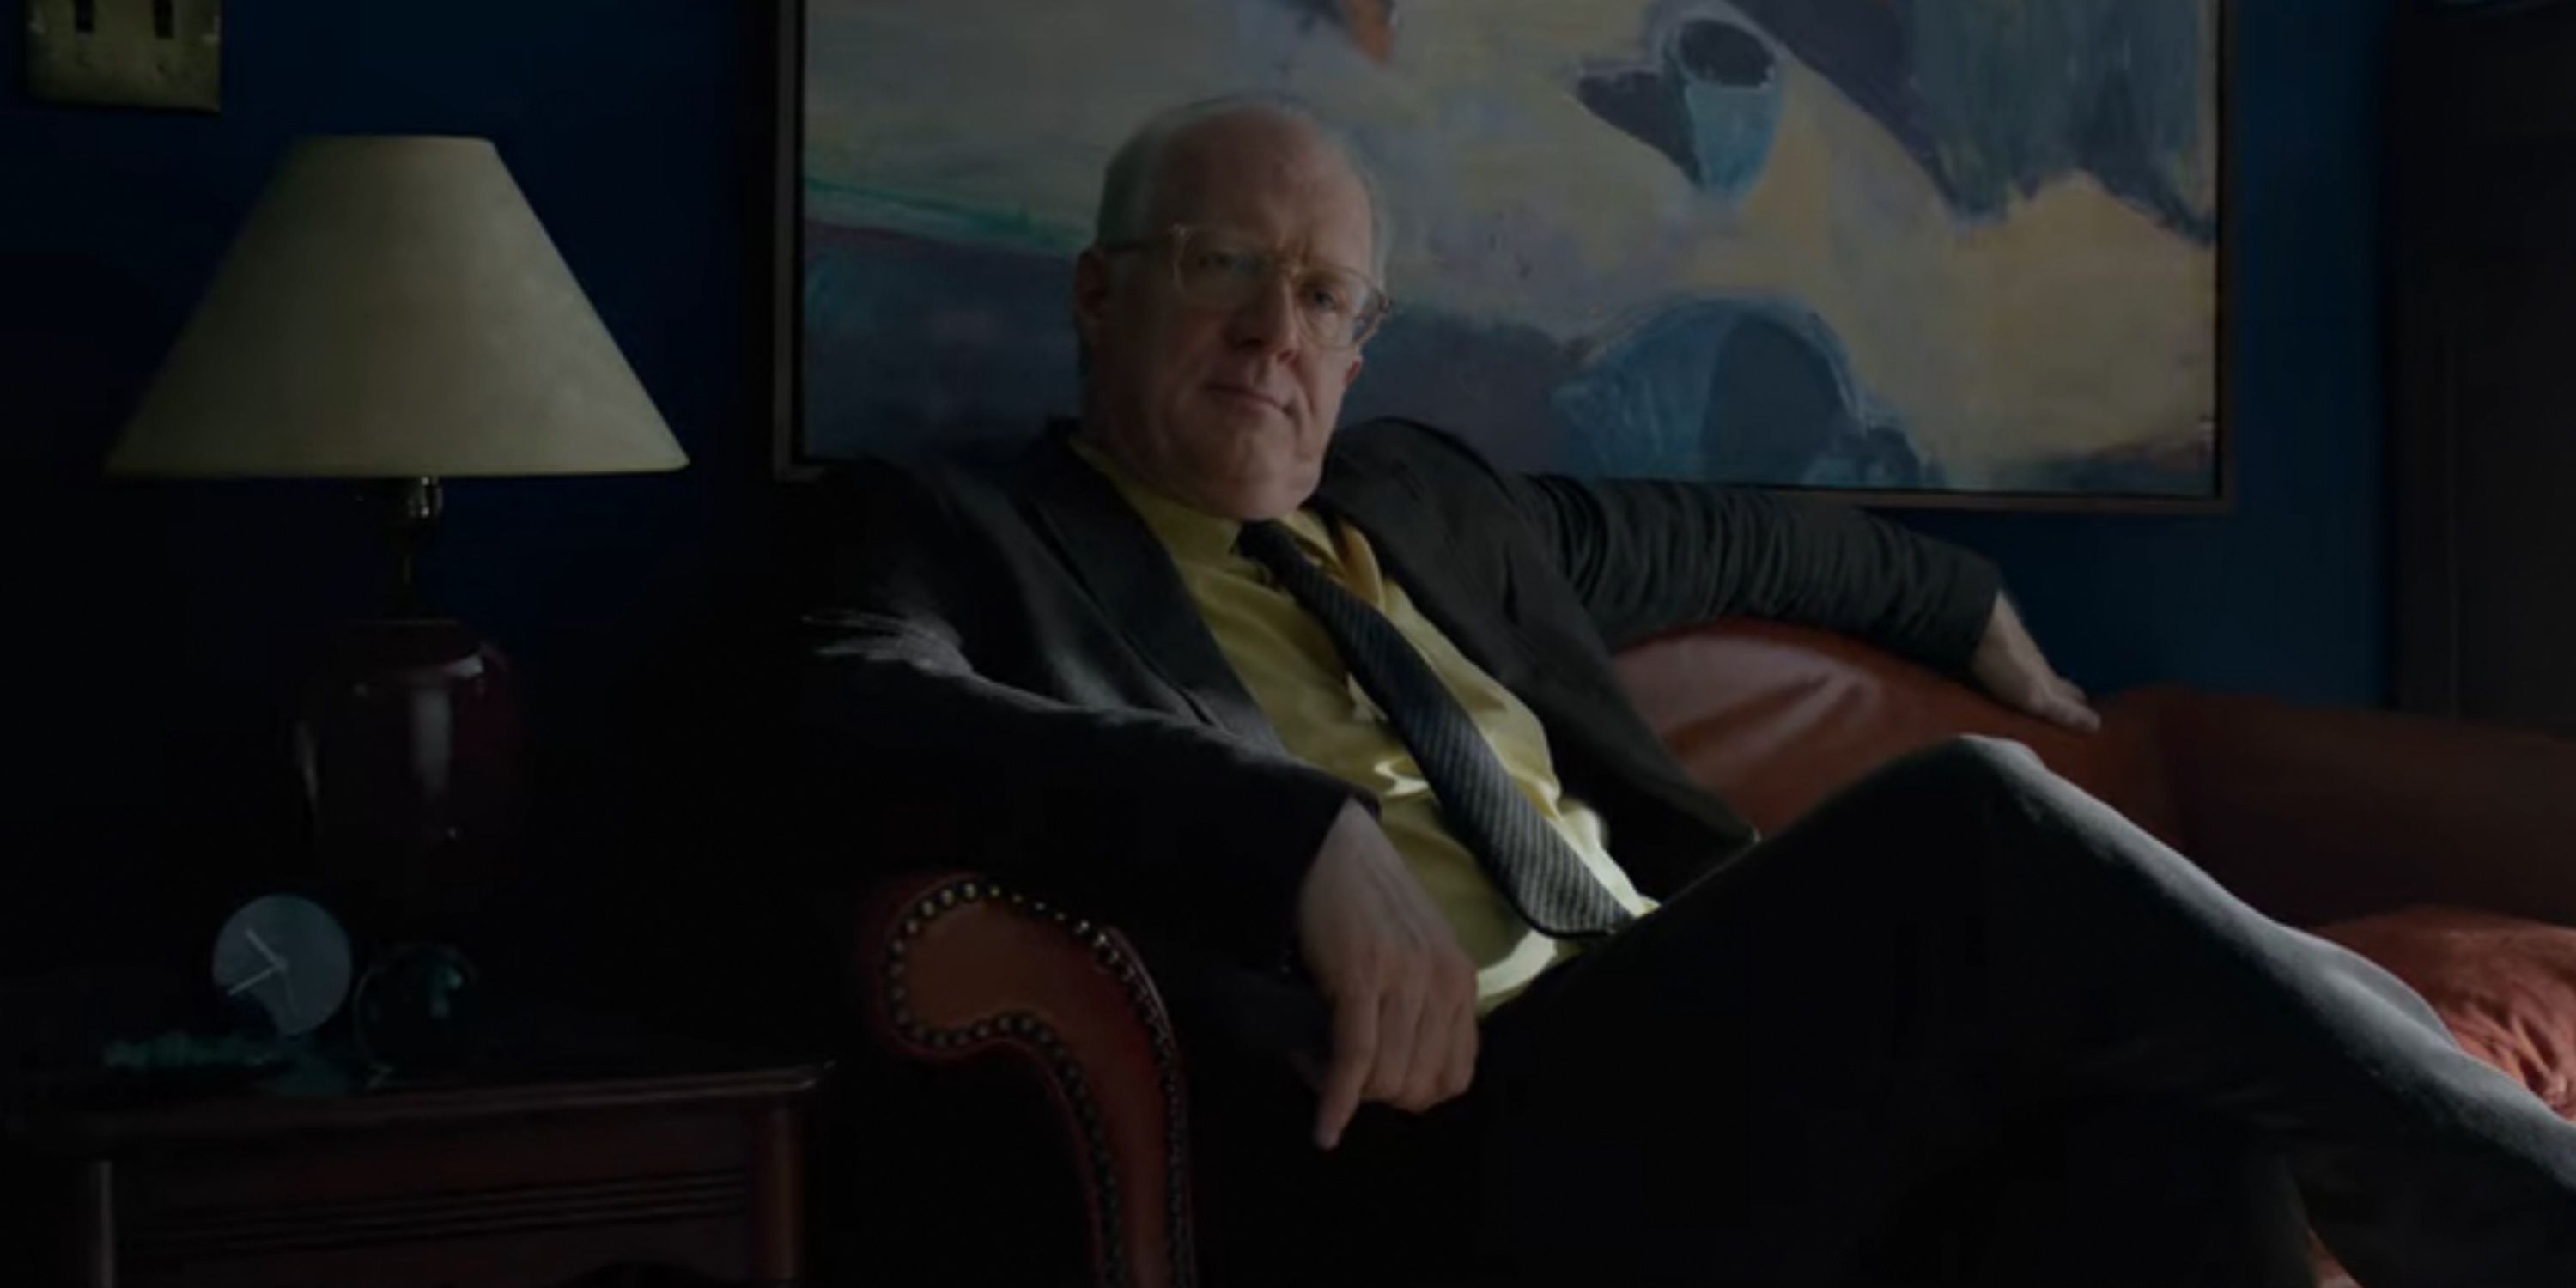 Tracy Letts as Dr. Carl Landy in The Woman in the Window on Netflix